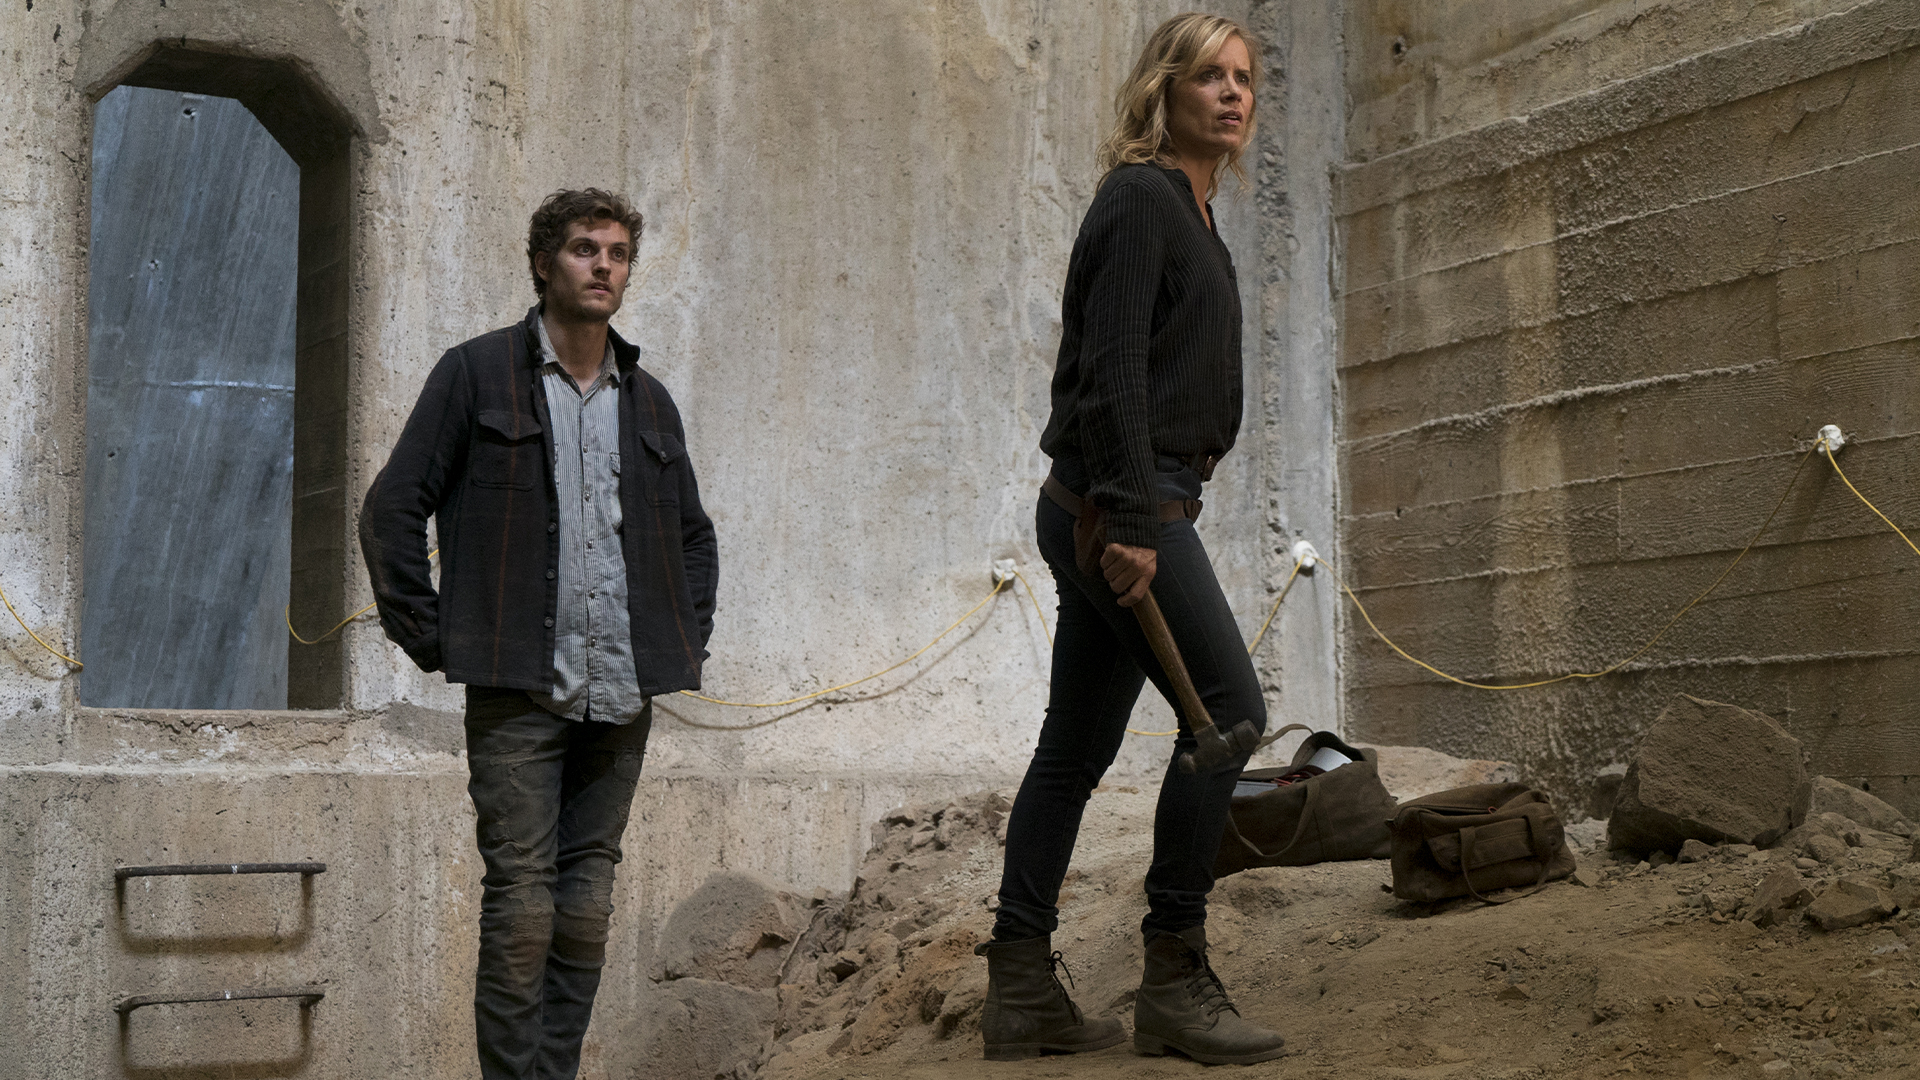 Fear the Walking Dead: Best of Madison Season 1 Episode 4 - Things Bad Begun: Best of Madison Edition